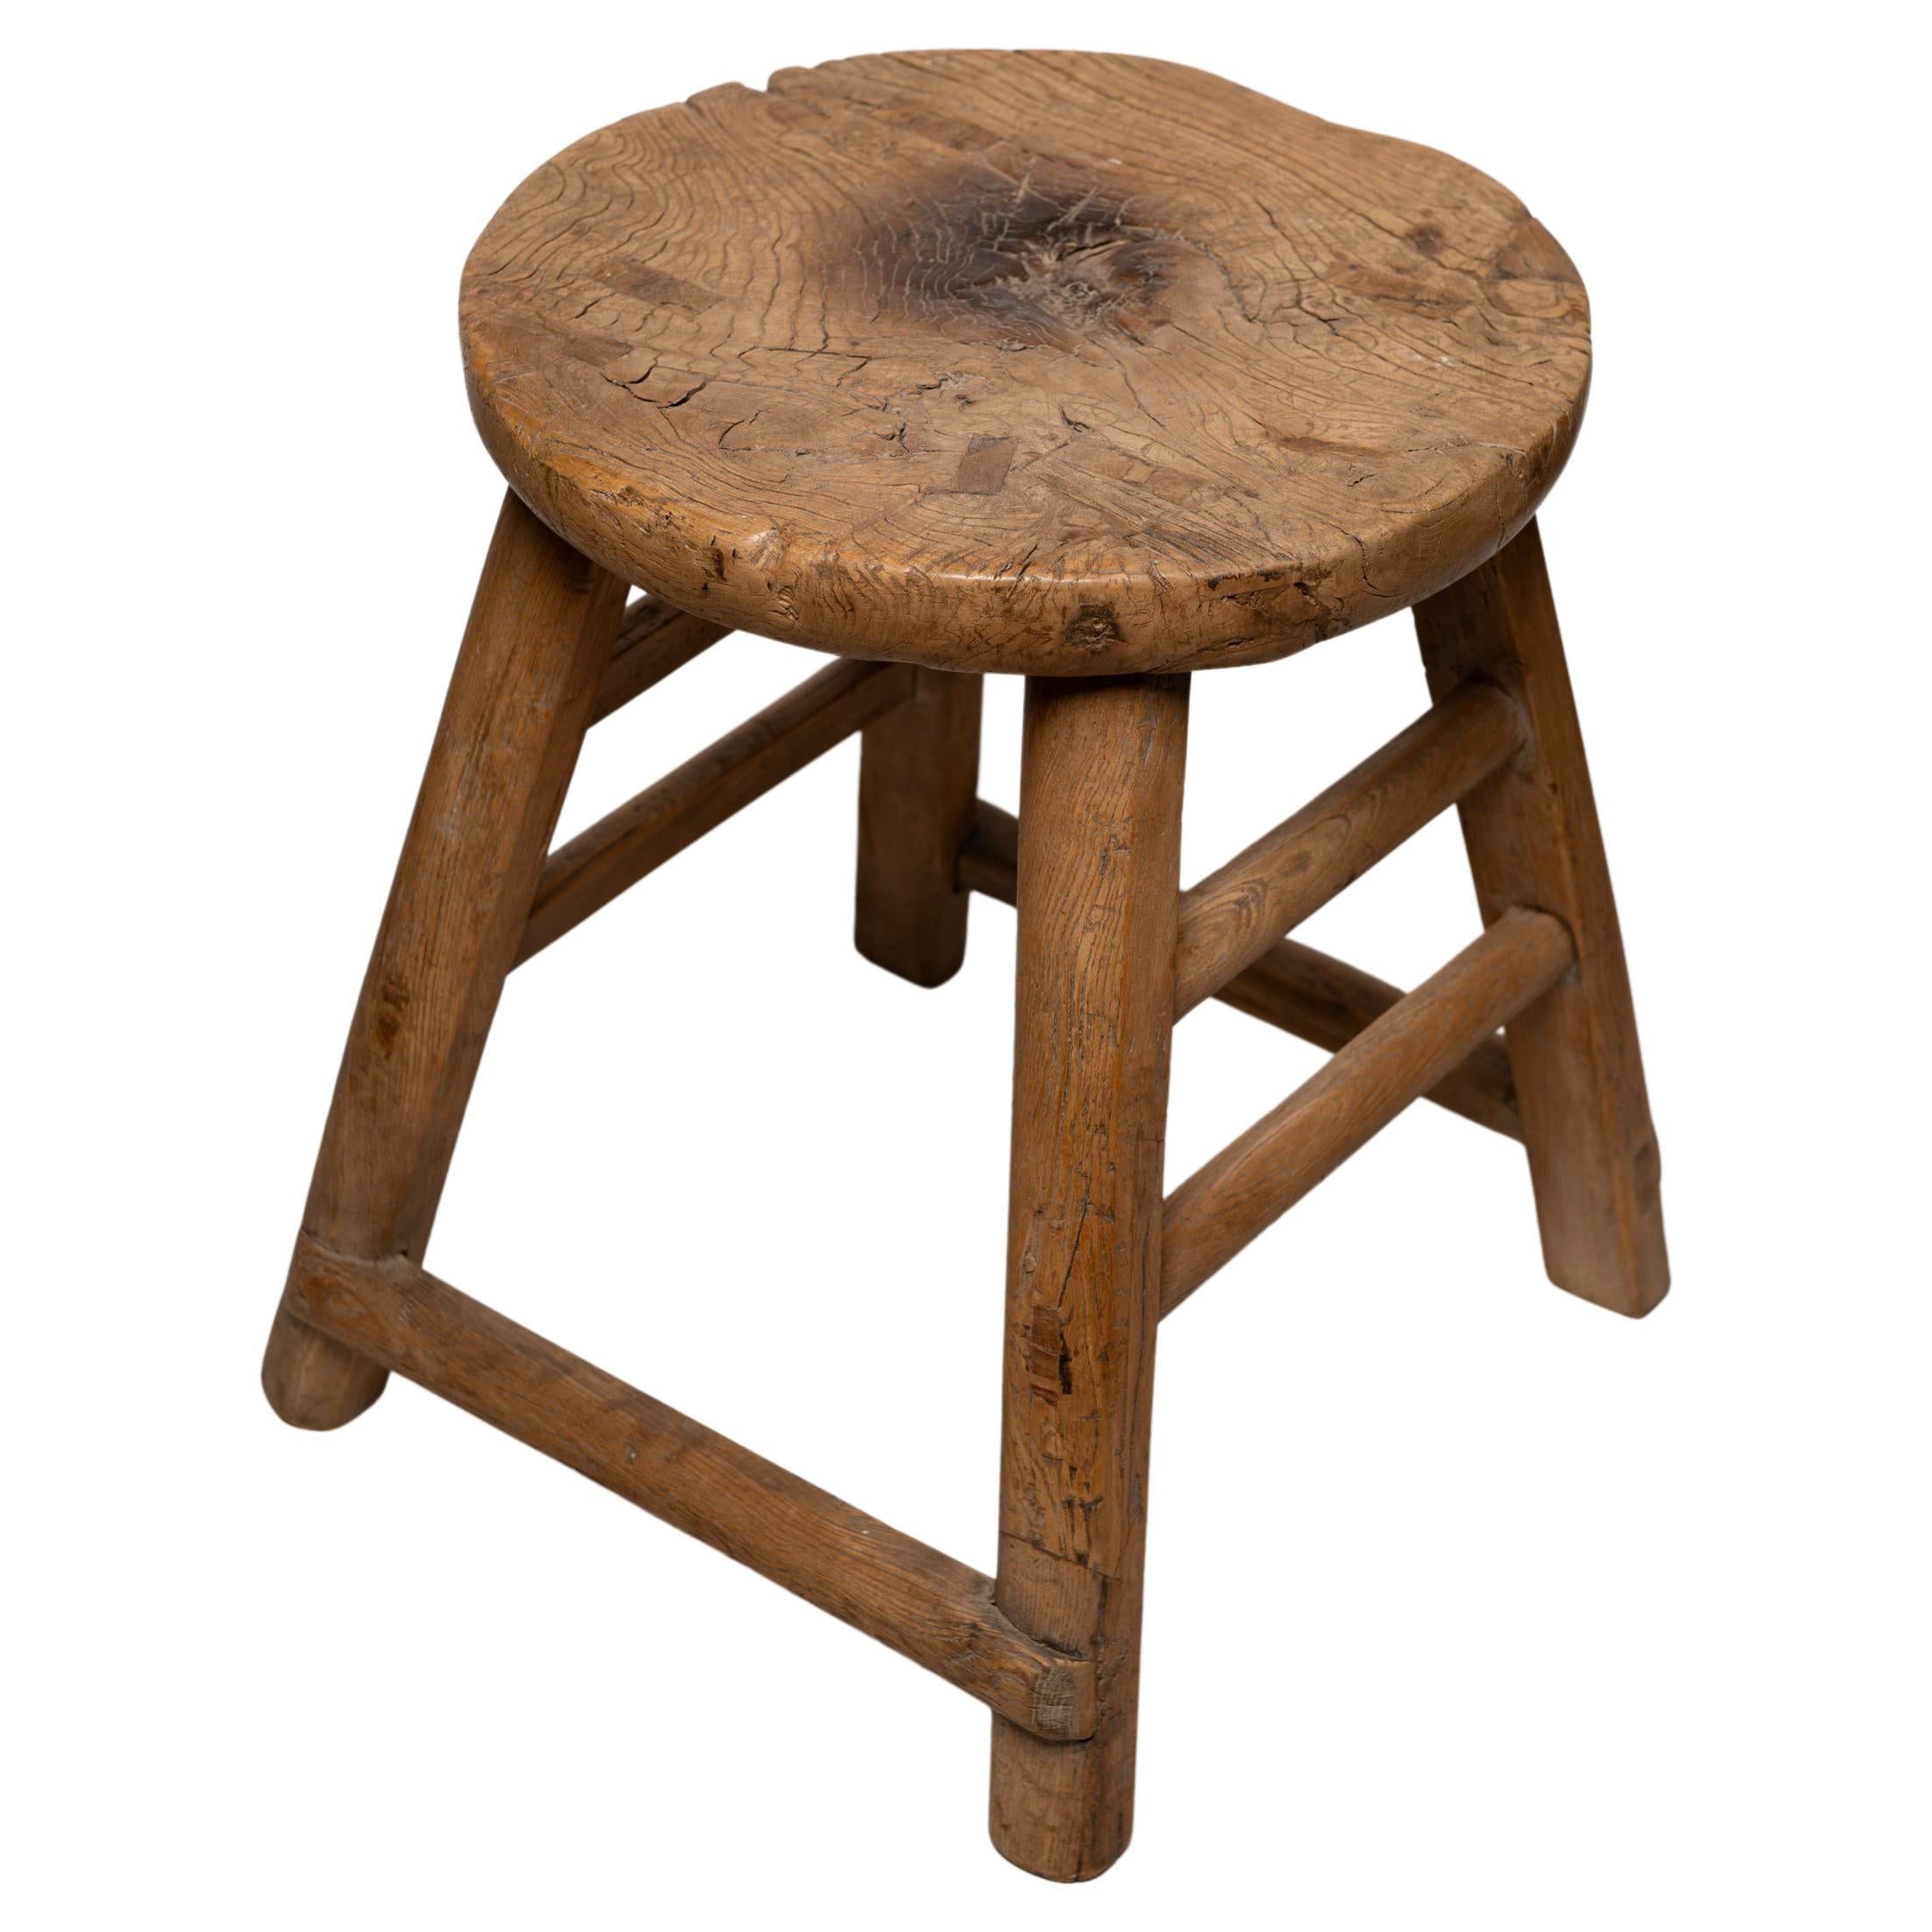   Wooden Rustic Stool in "Wabi-Sabi" Condition For Sale